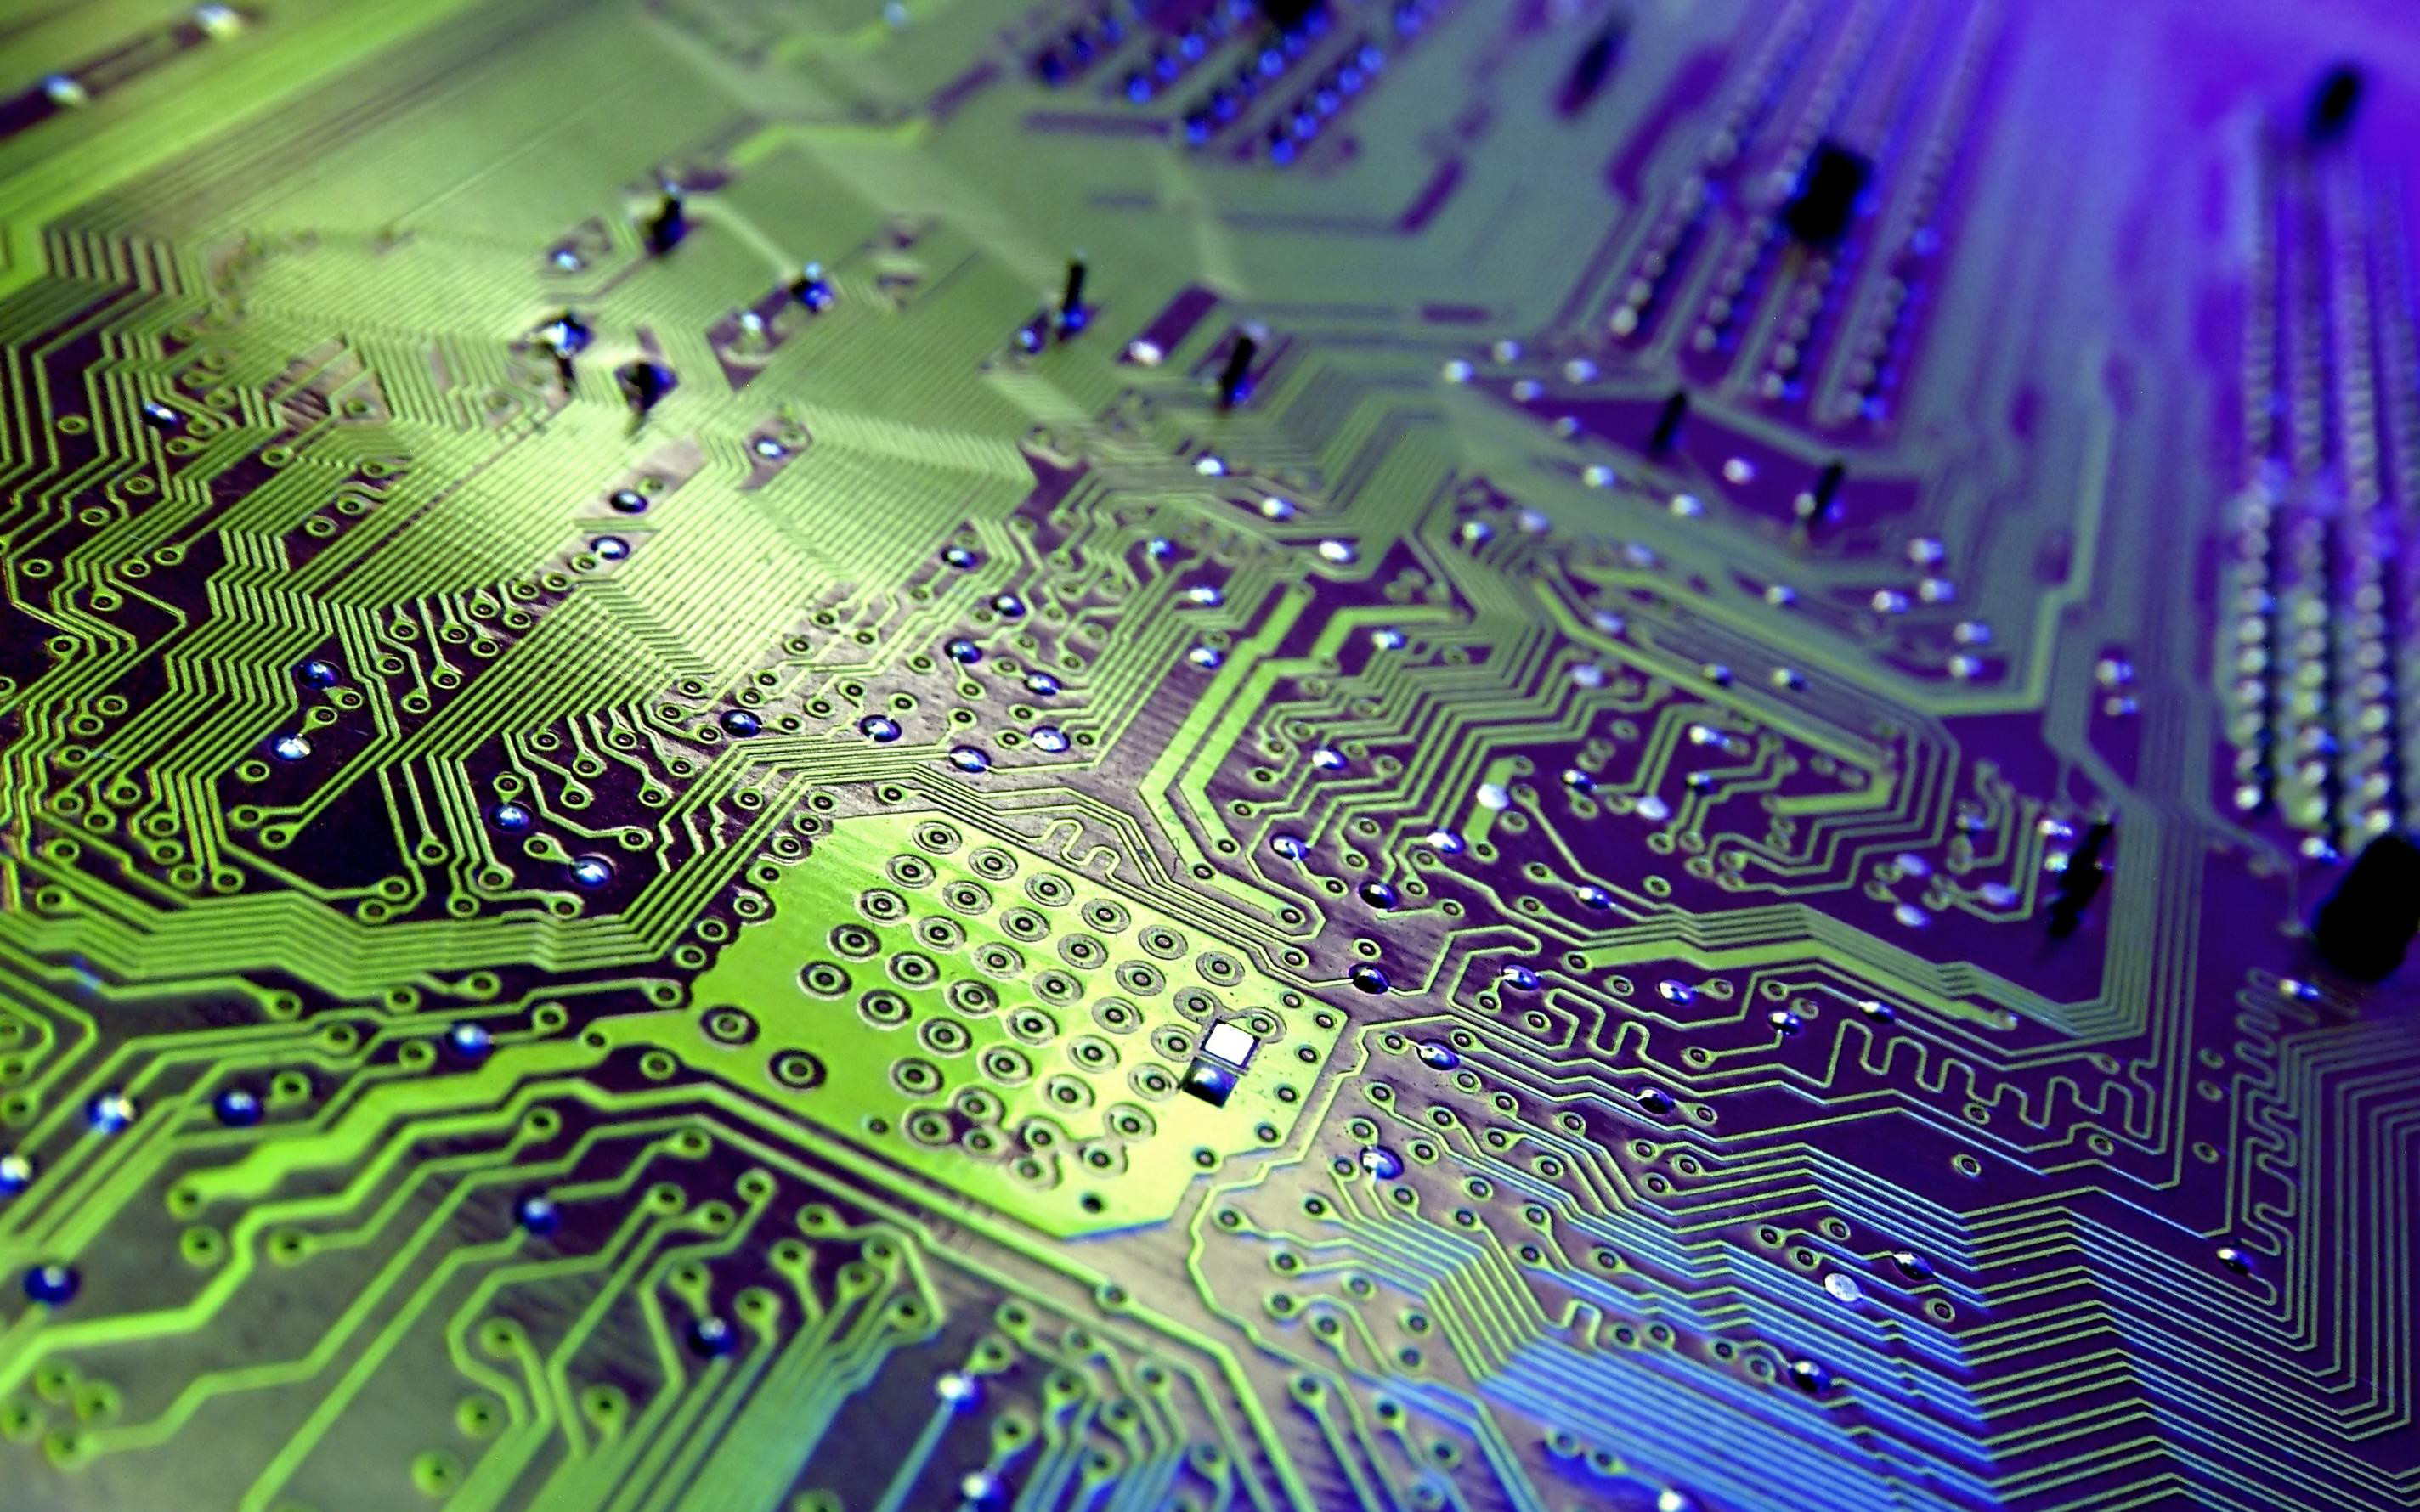 2848x1780 Printed Circuit Board Wallpapers, Desktop Backgrounds, Free Images Download  | Akspic